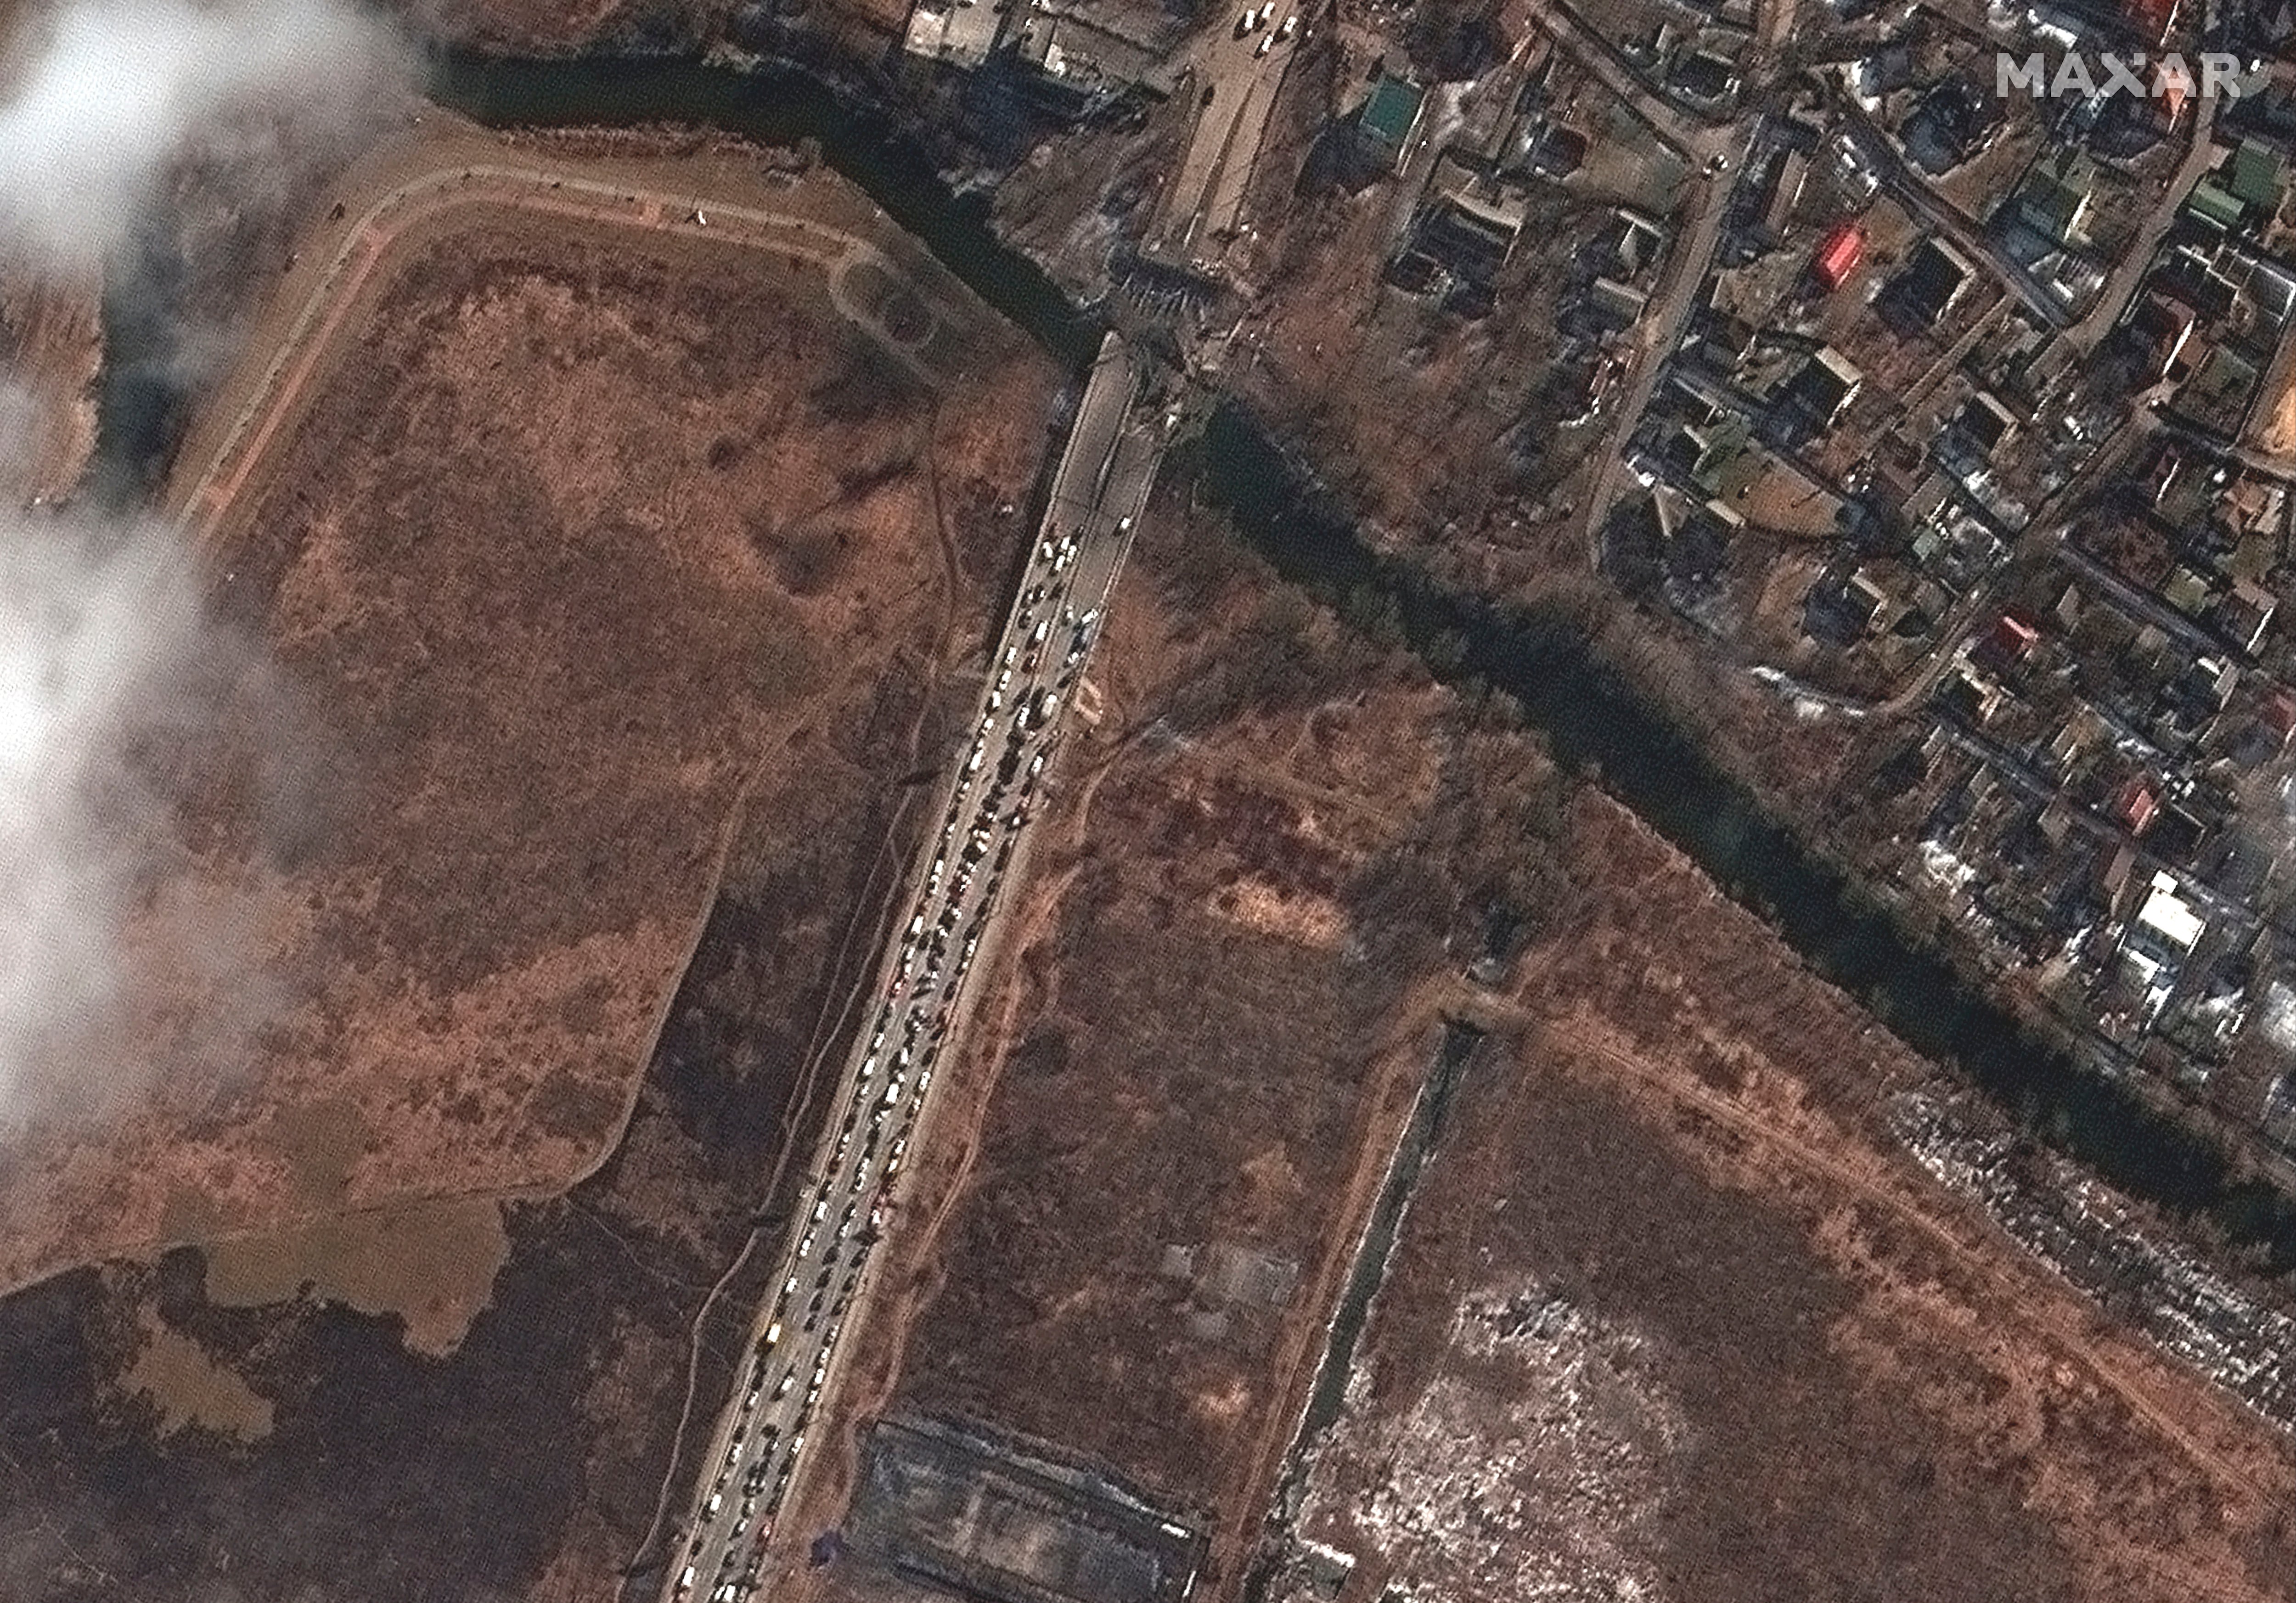 A long line of people and cars waiting by the damaged Irpin River bridge during the Russian invasion, in Irpin, Ukraine.  (Satellite image ©2022 Maxar Technologies via AP.)